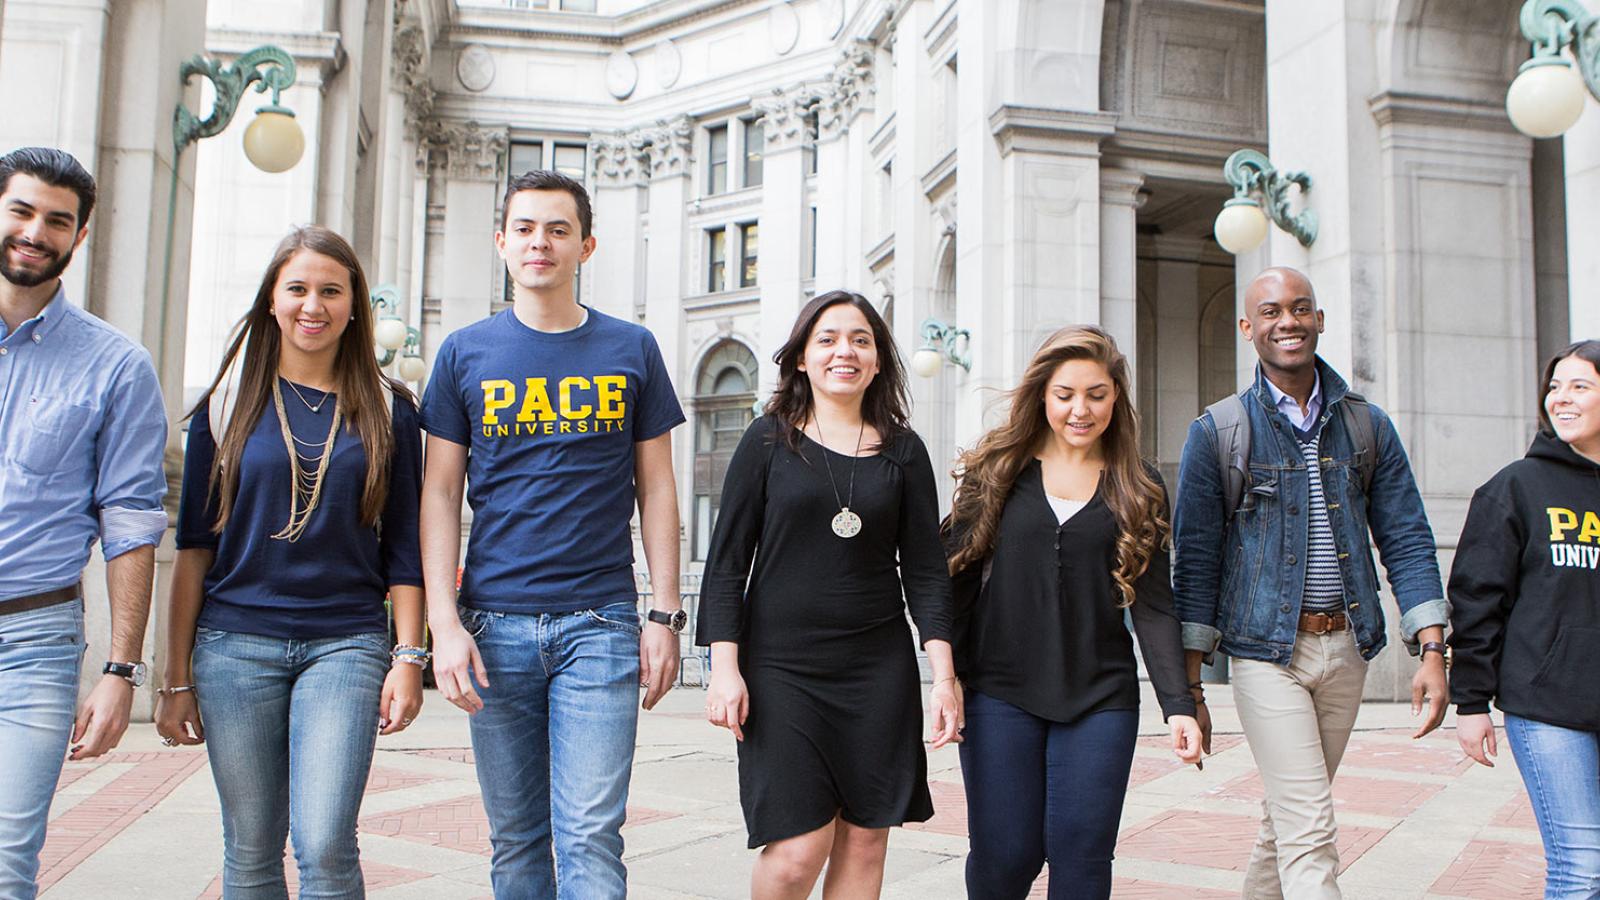 Pace University students walking side by side